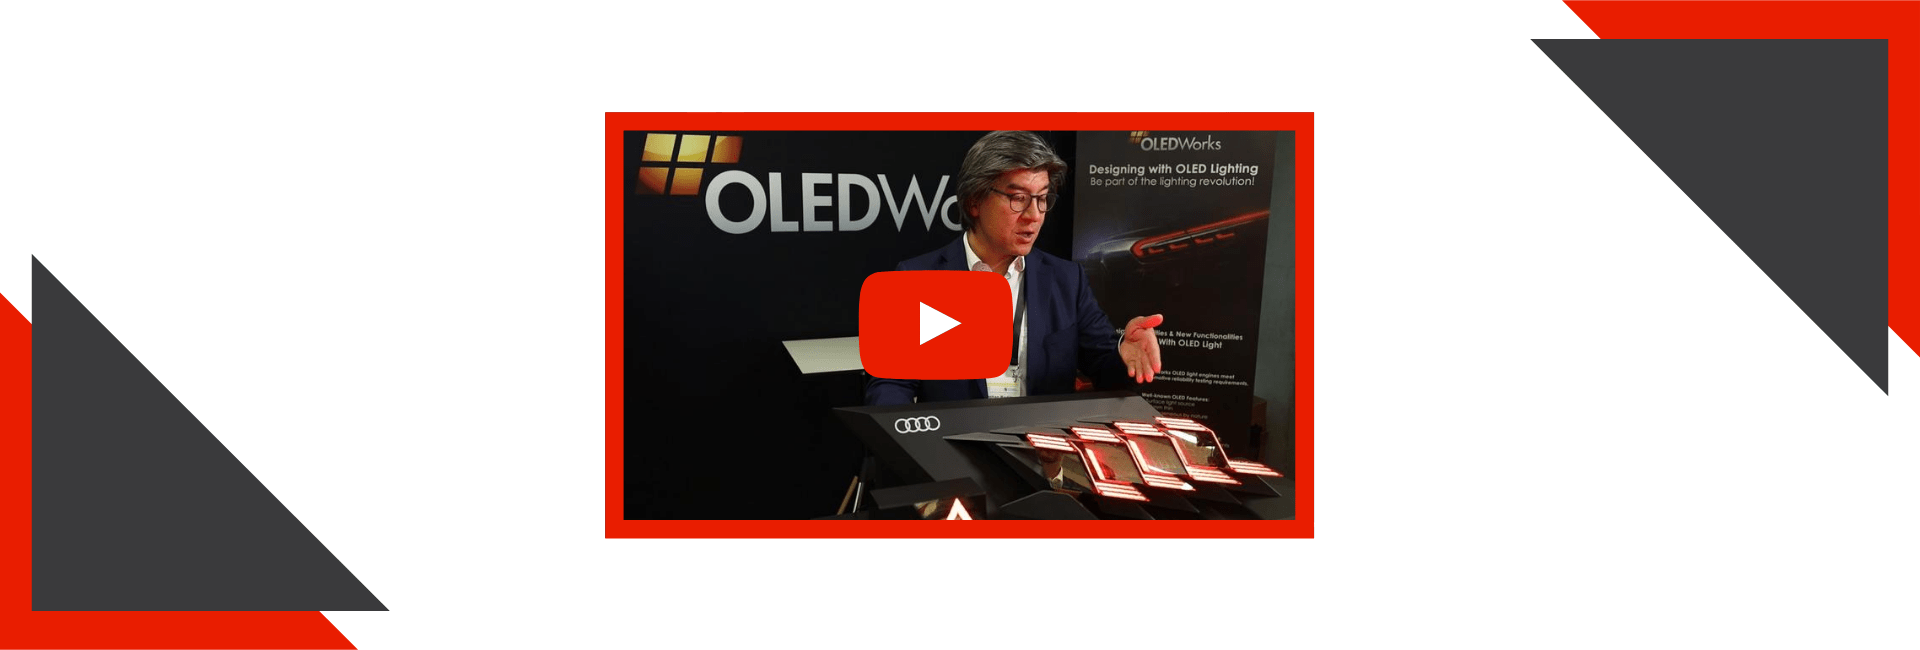 Audi Interview - OLED Lighting as a Safety Feature, Flexible Advantages, and More